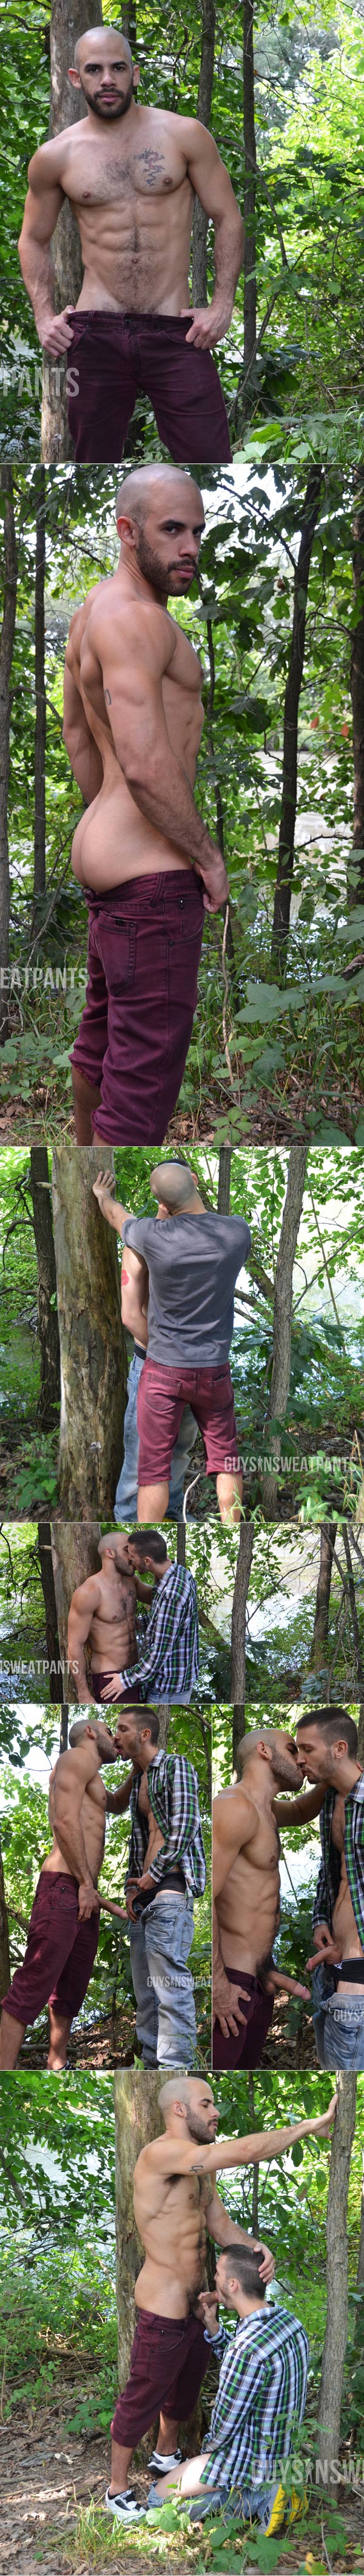 A Walk In The Woods (Arnaud Chagall & Austin Wilde) at Guys In Sweatpants